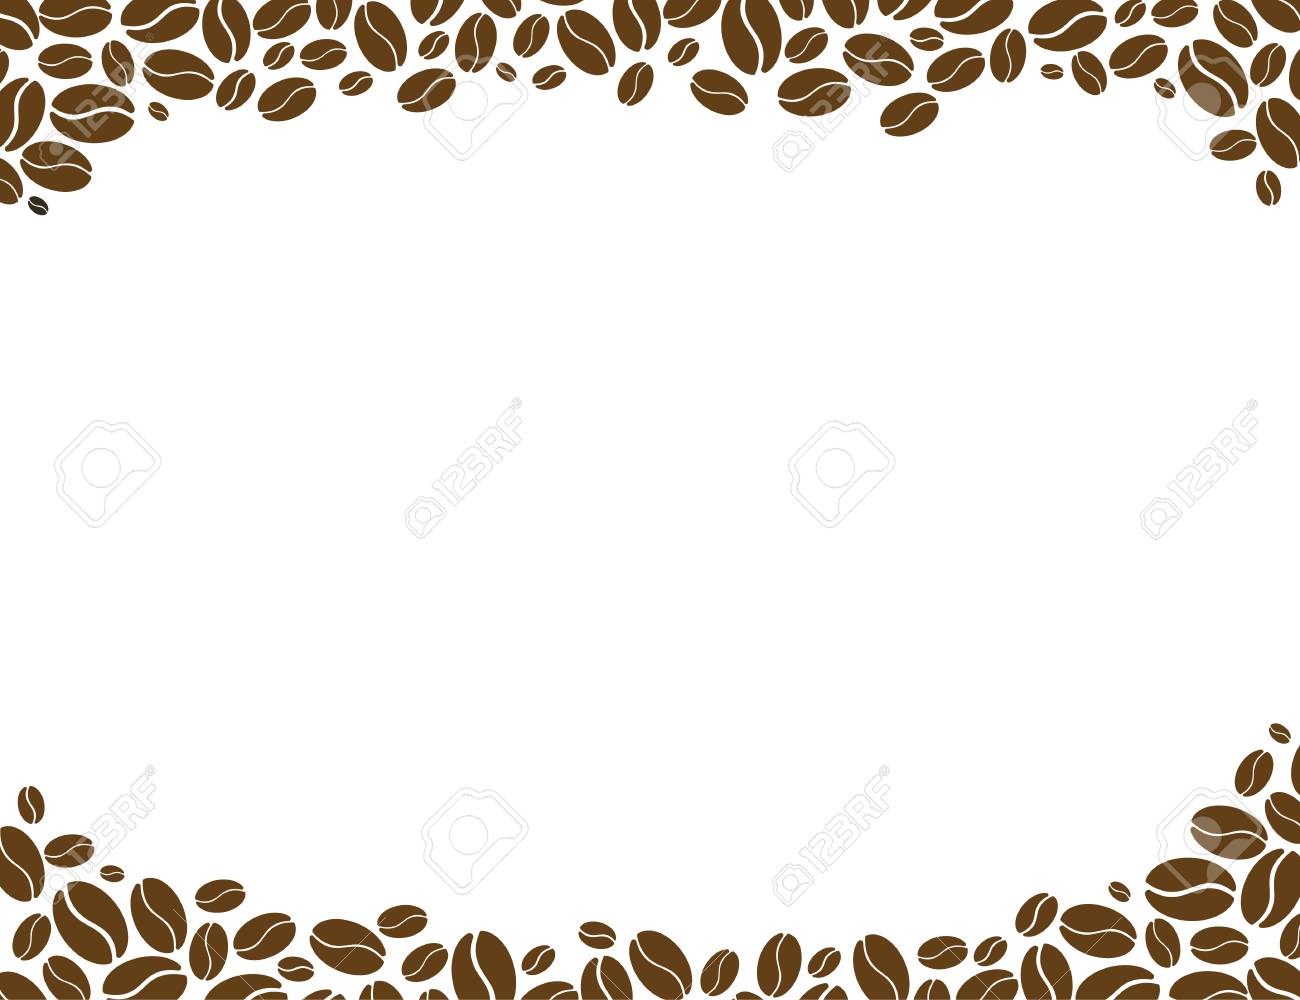 Coffee Beans On A White Background Royalty